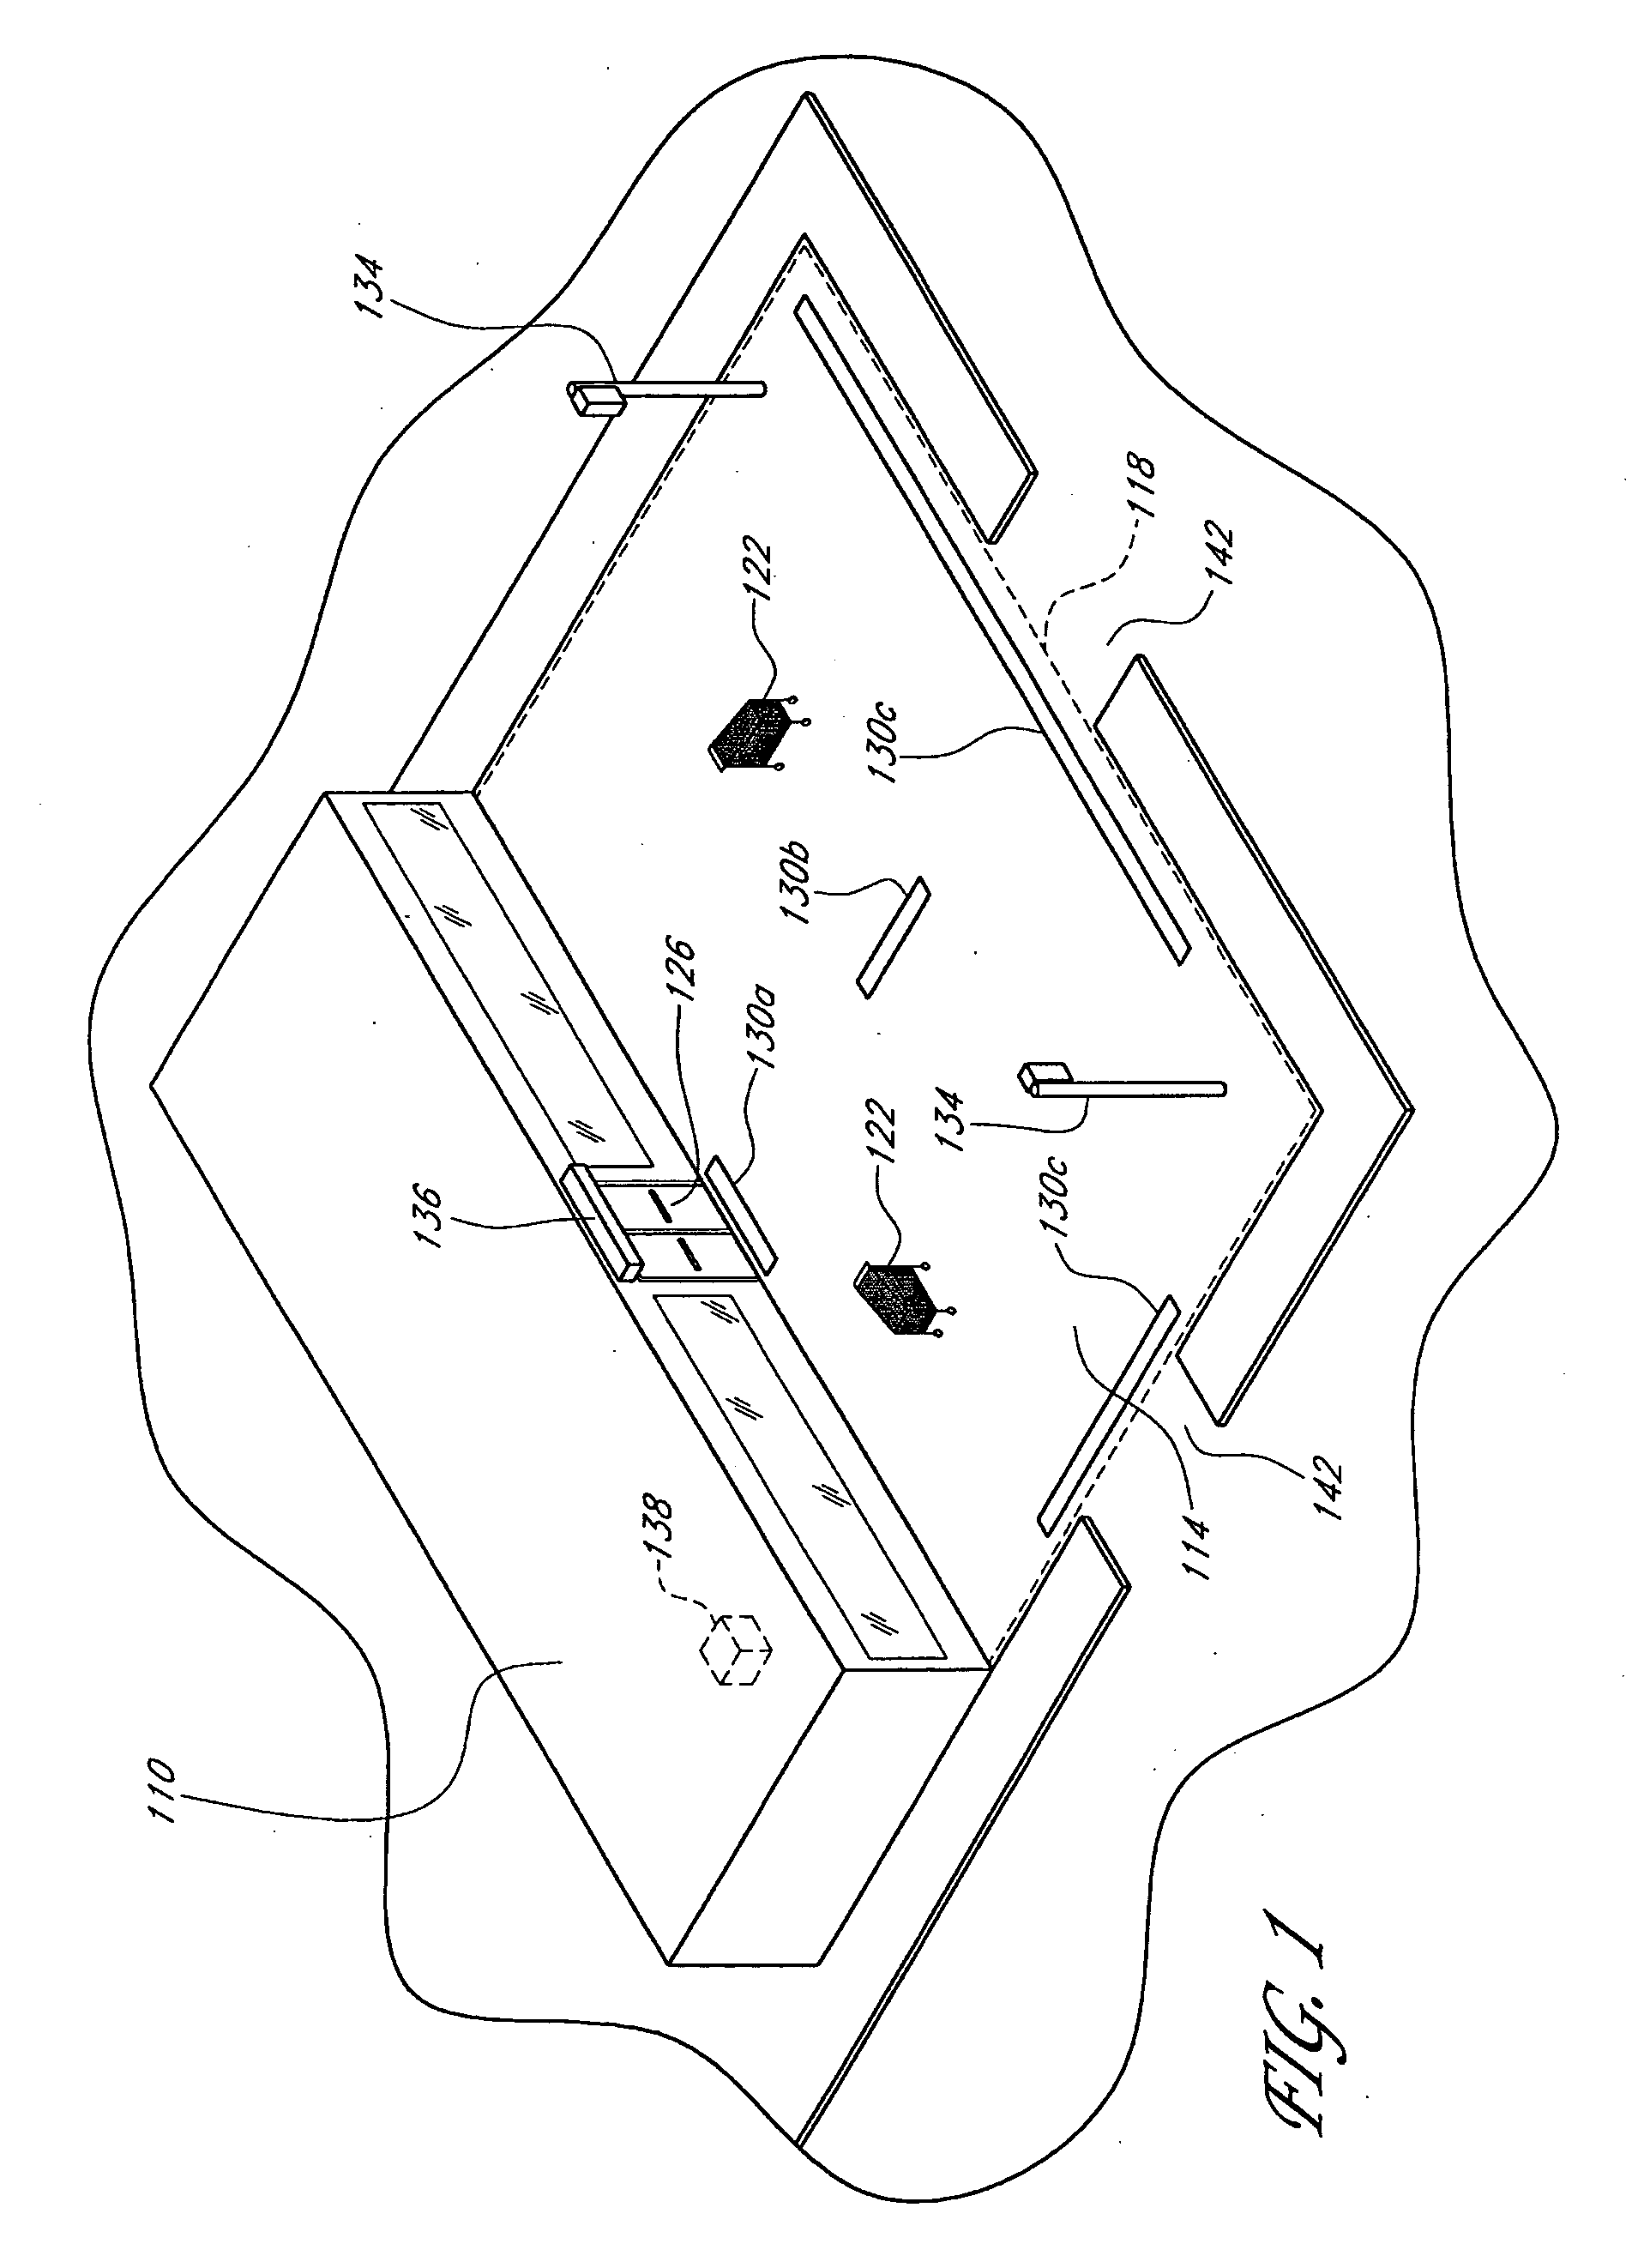 Navigation systems and methods for wheeled objects